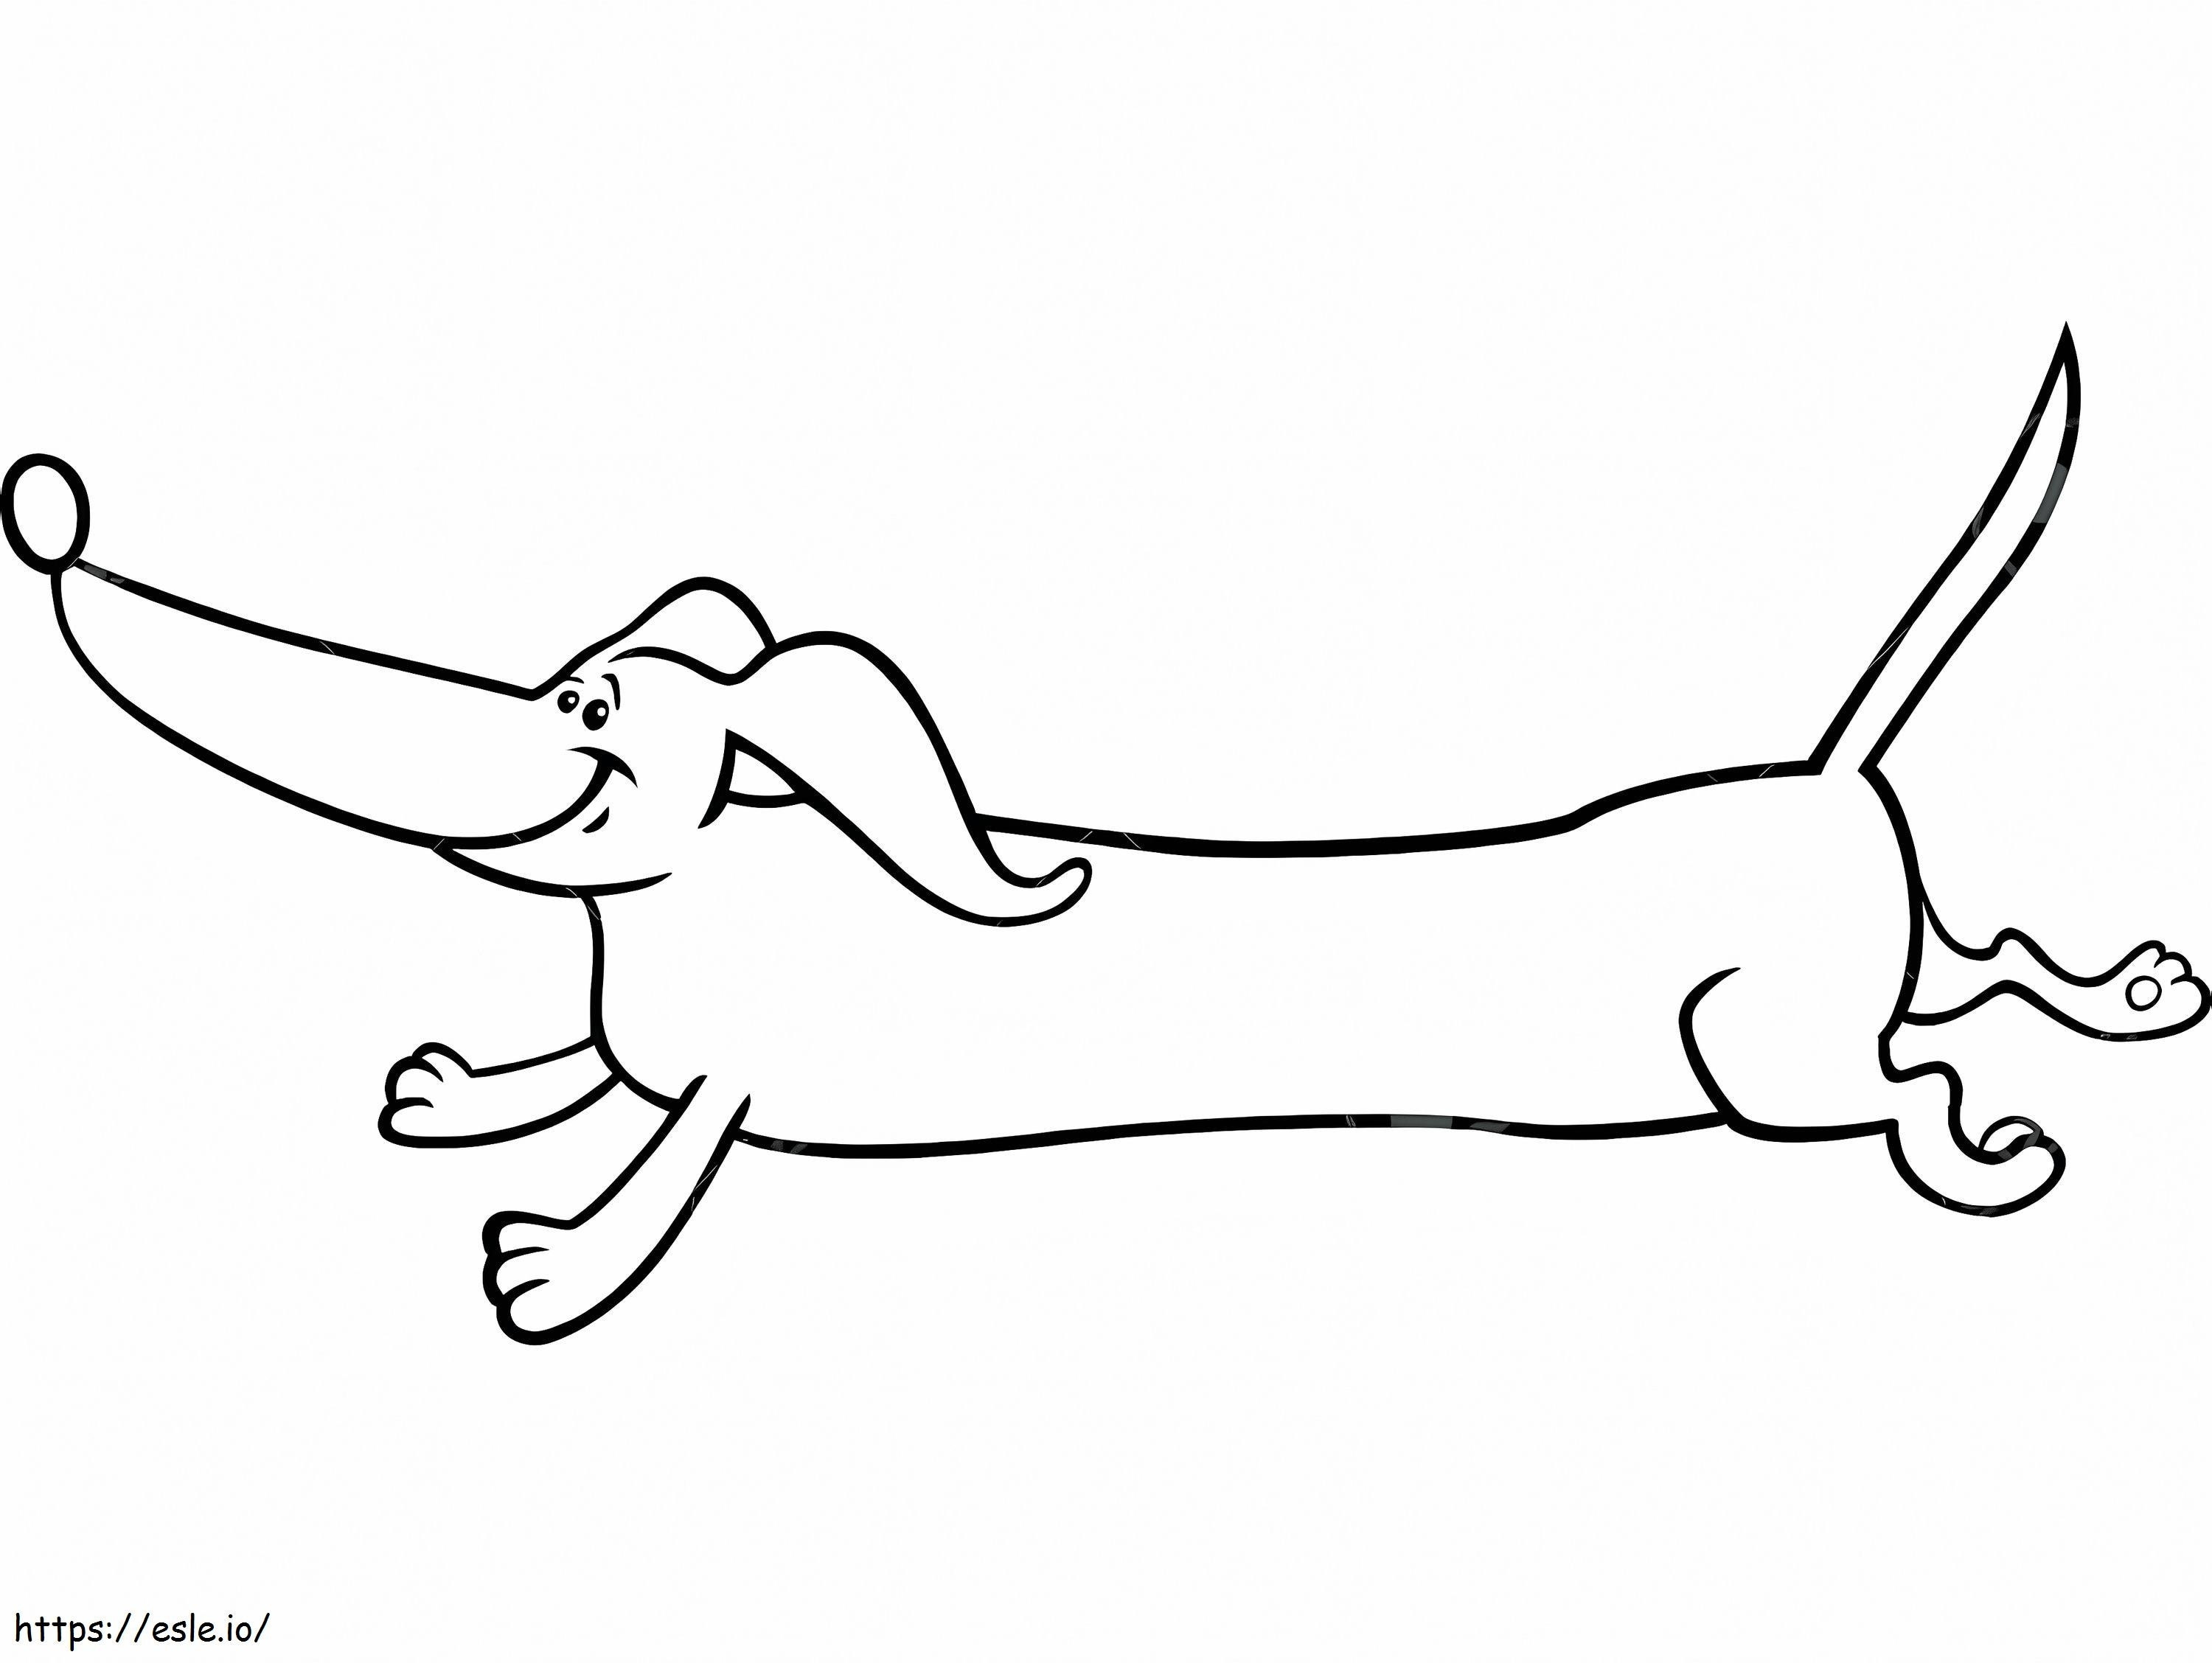 Running Dachshund coloring page